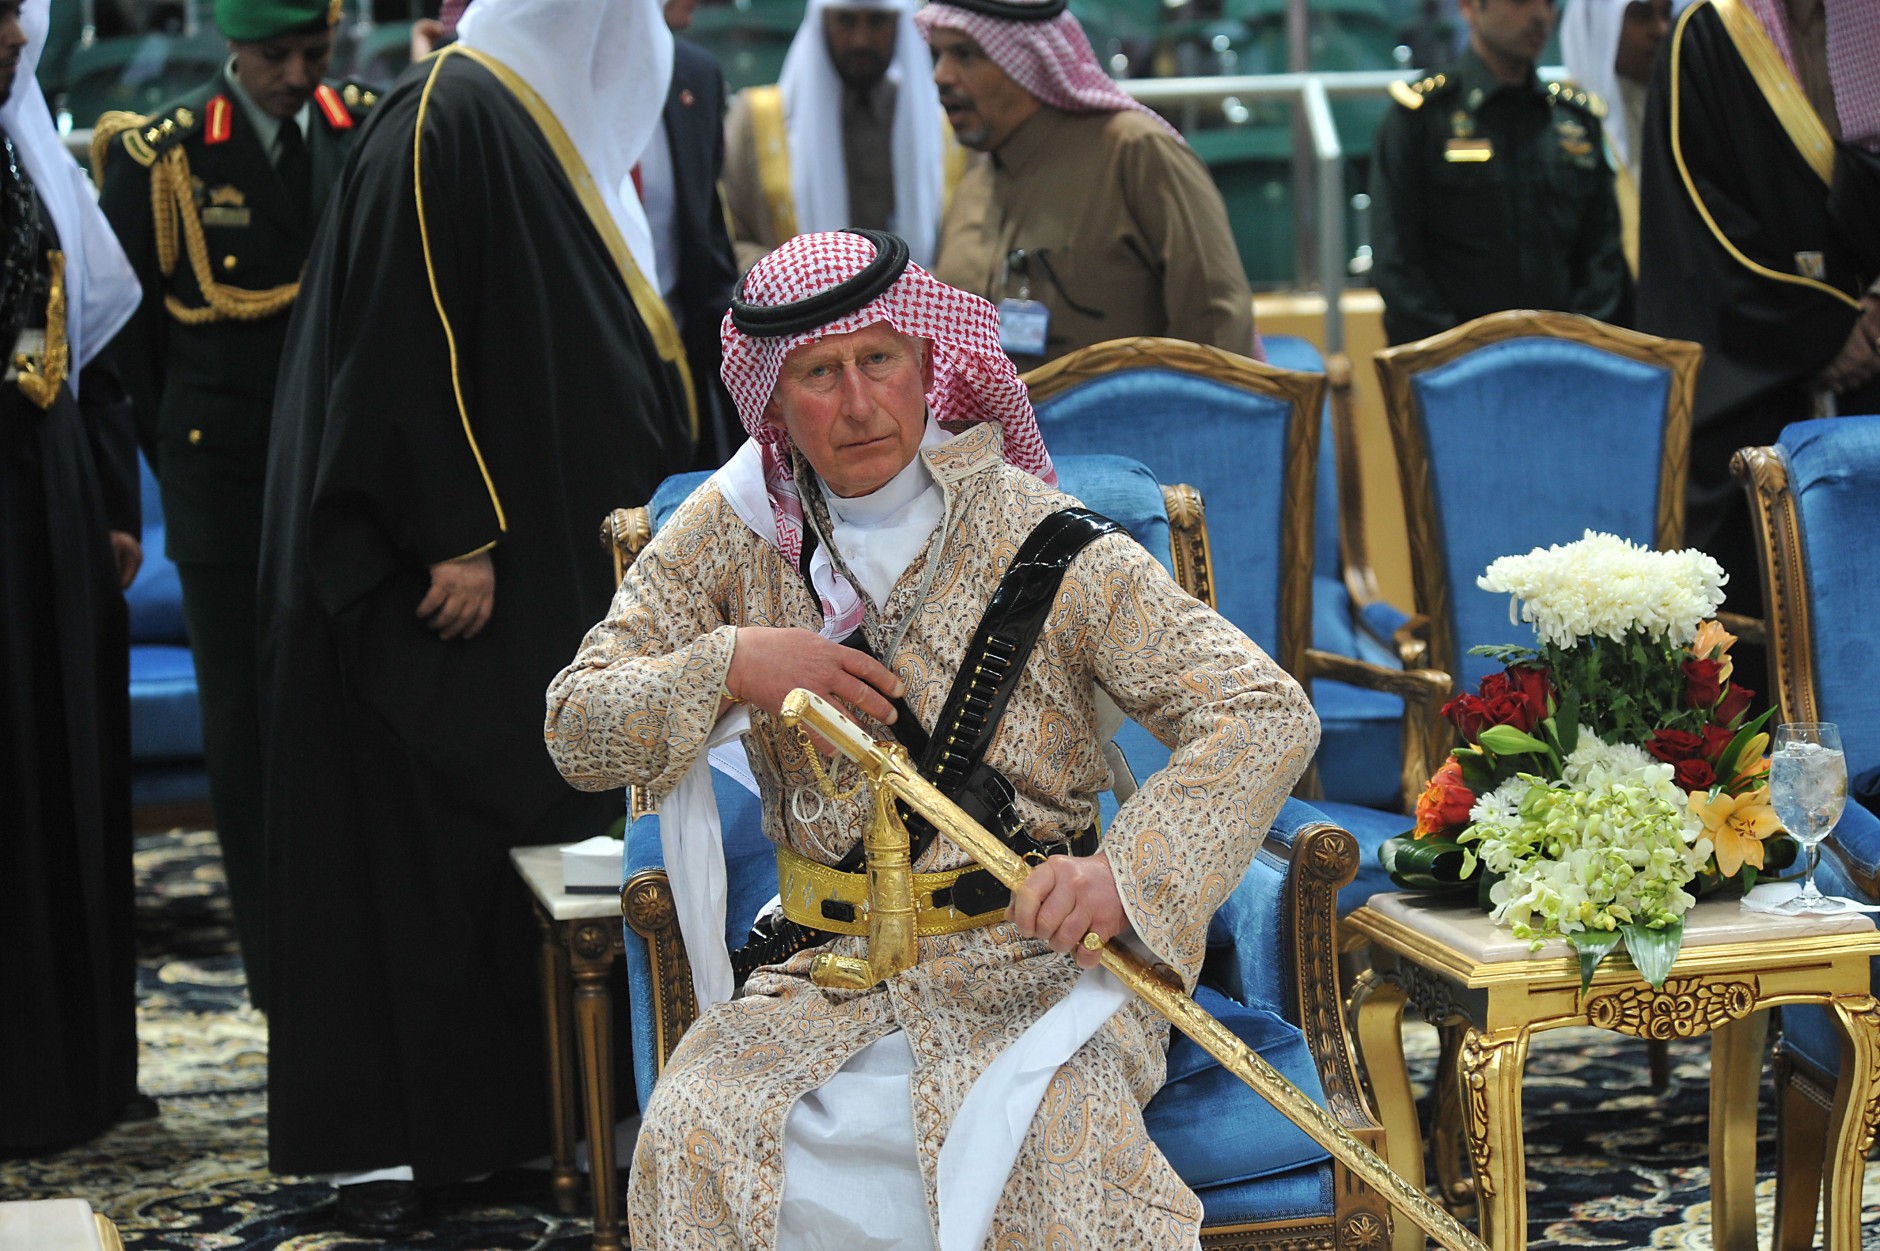 FOR USE AS DESIRED, YEAR END PHOTOS - FILE - Britain's Prince Charles wears a traditional Saudi uniform as he attends the traditional Saudi dancing best known as &quot;Arda,&quot; performed during Janadriya culture festival at Der'iya in Riyadh, Tuesday, Feb. 18, 2014.   (AP Photo/Fayez Nureldine, File Pool)